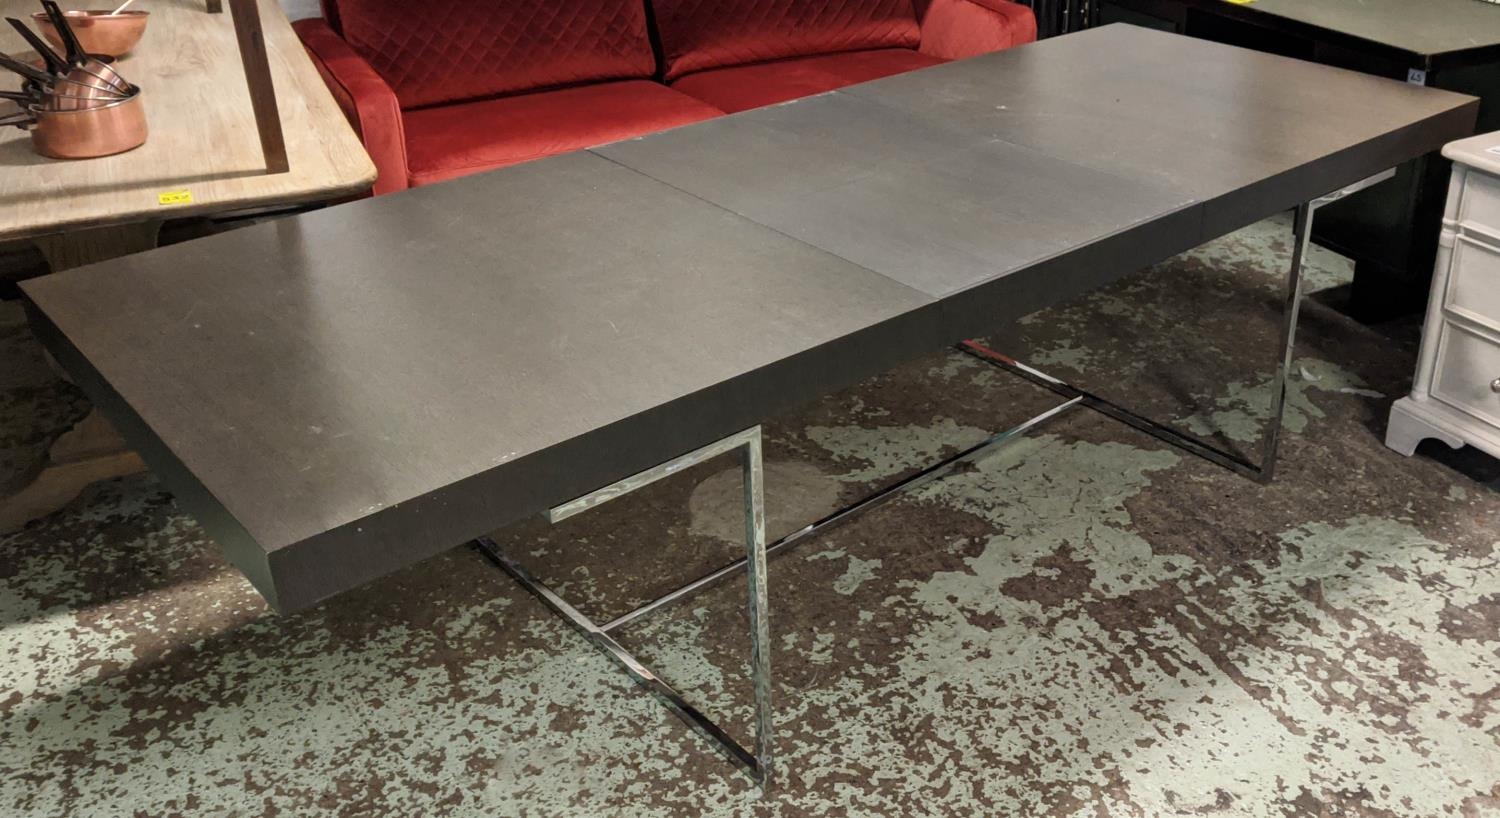 B&B ITALIA ATHOS TABLE BY PAOLO PIVA, 200cm x 100cm x 73cm unextended. - Image 7 of 7